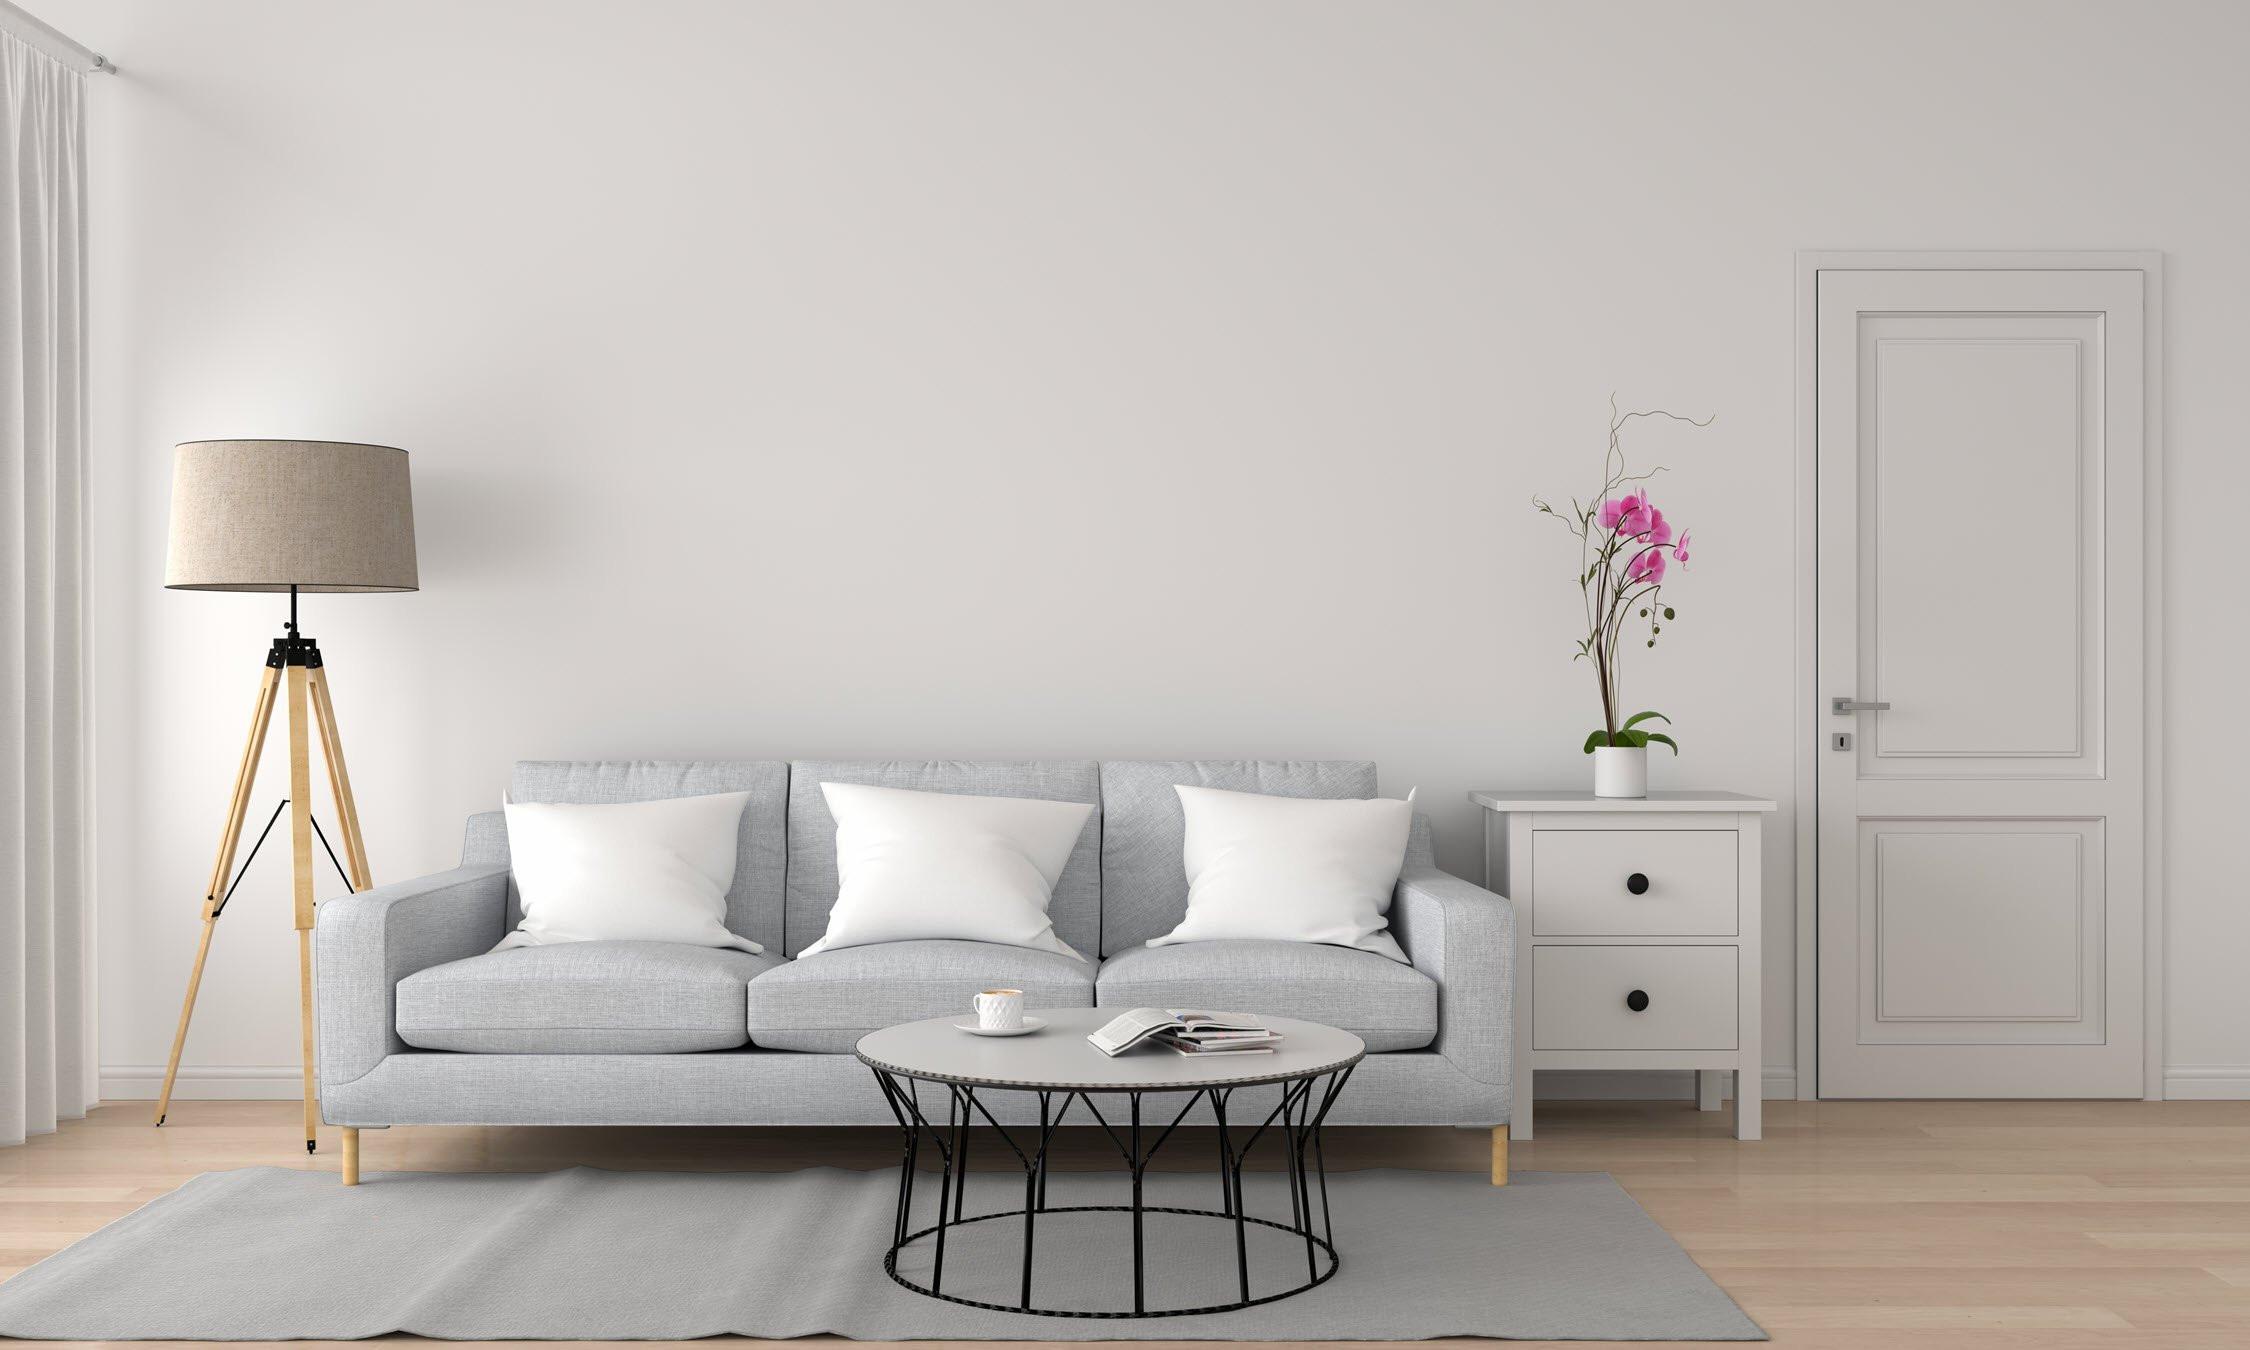 Minimalistic Living Room
 How To Easily Create The Perfect Minimalist Living Room